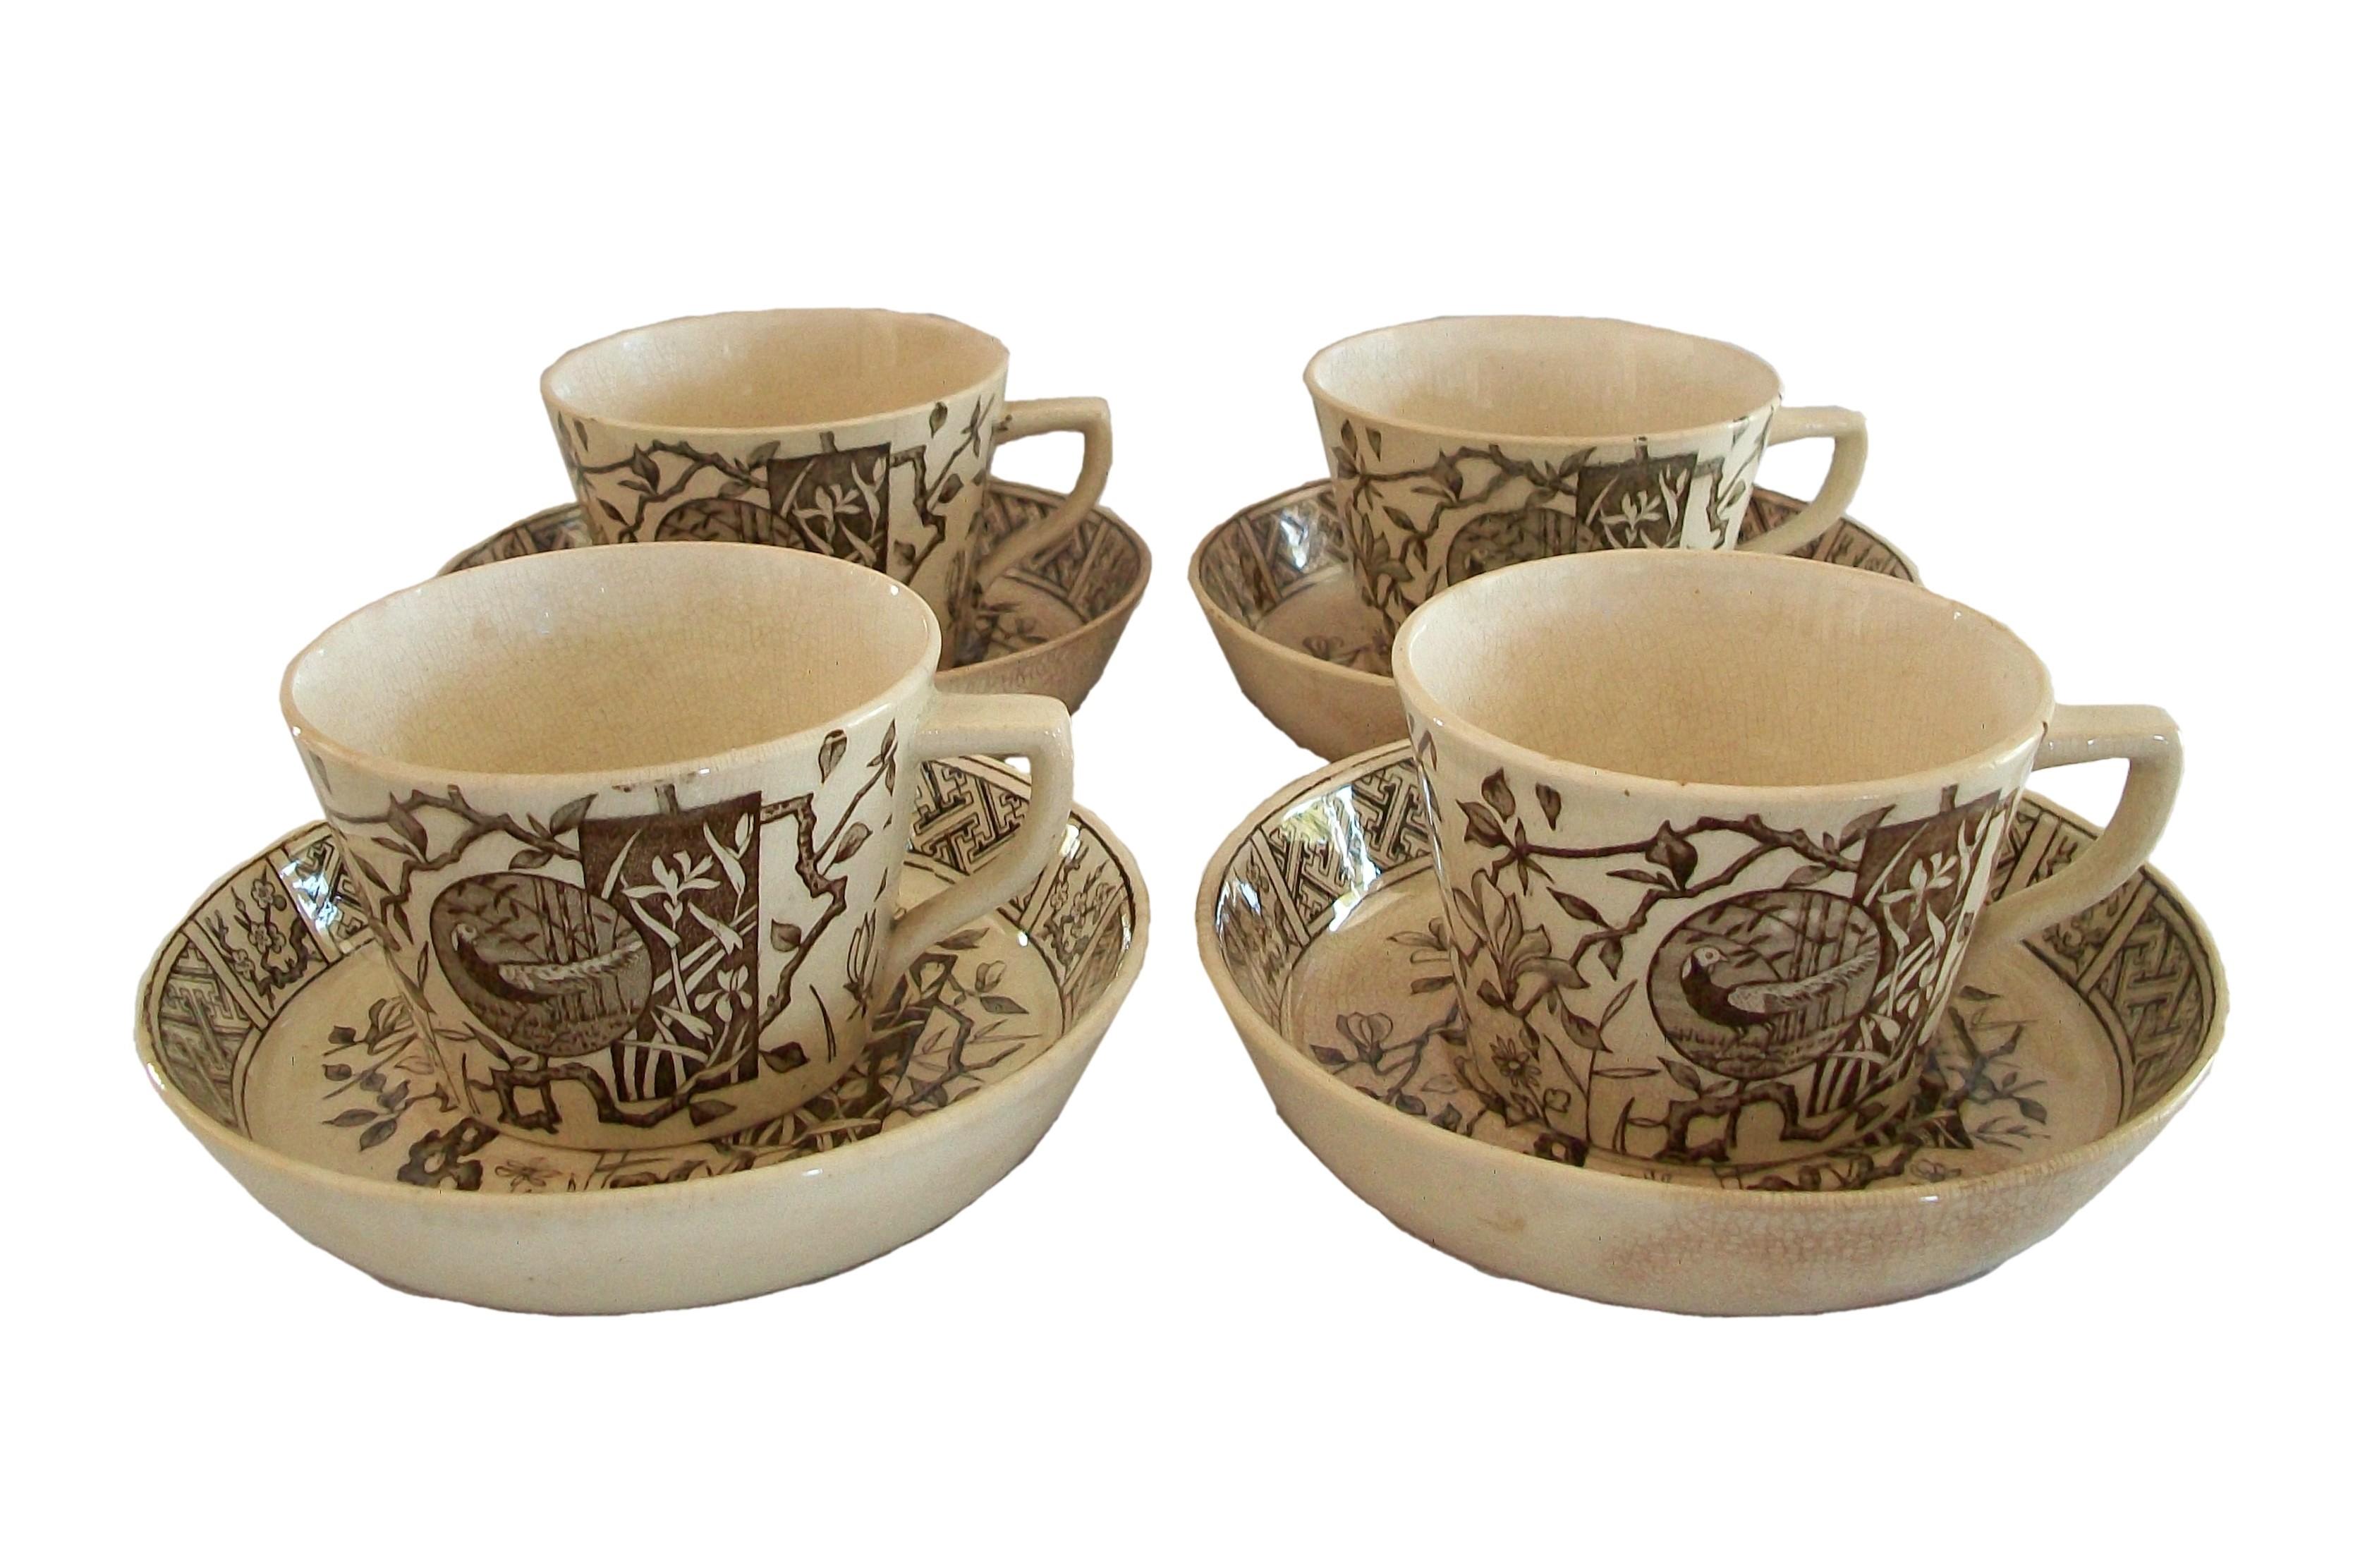 MINTON - 'Faisan' - Rare antique Aesthetic Movement ceramic tea cups and saucers - set of four - transfer decorated in brown on a cream ground - elaborate 'Japonesque' decoration featuring panels with birds and flowers - each piece signed on the